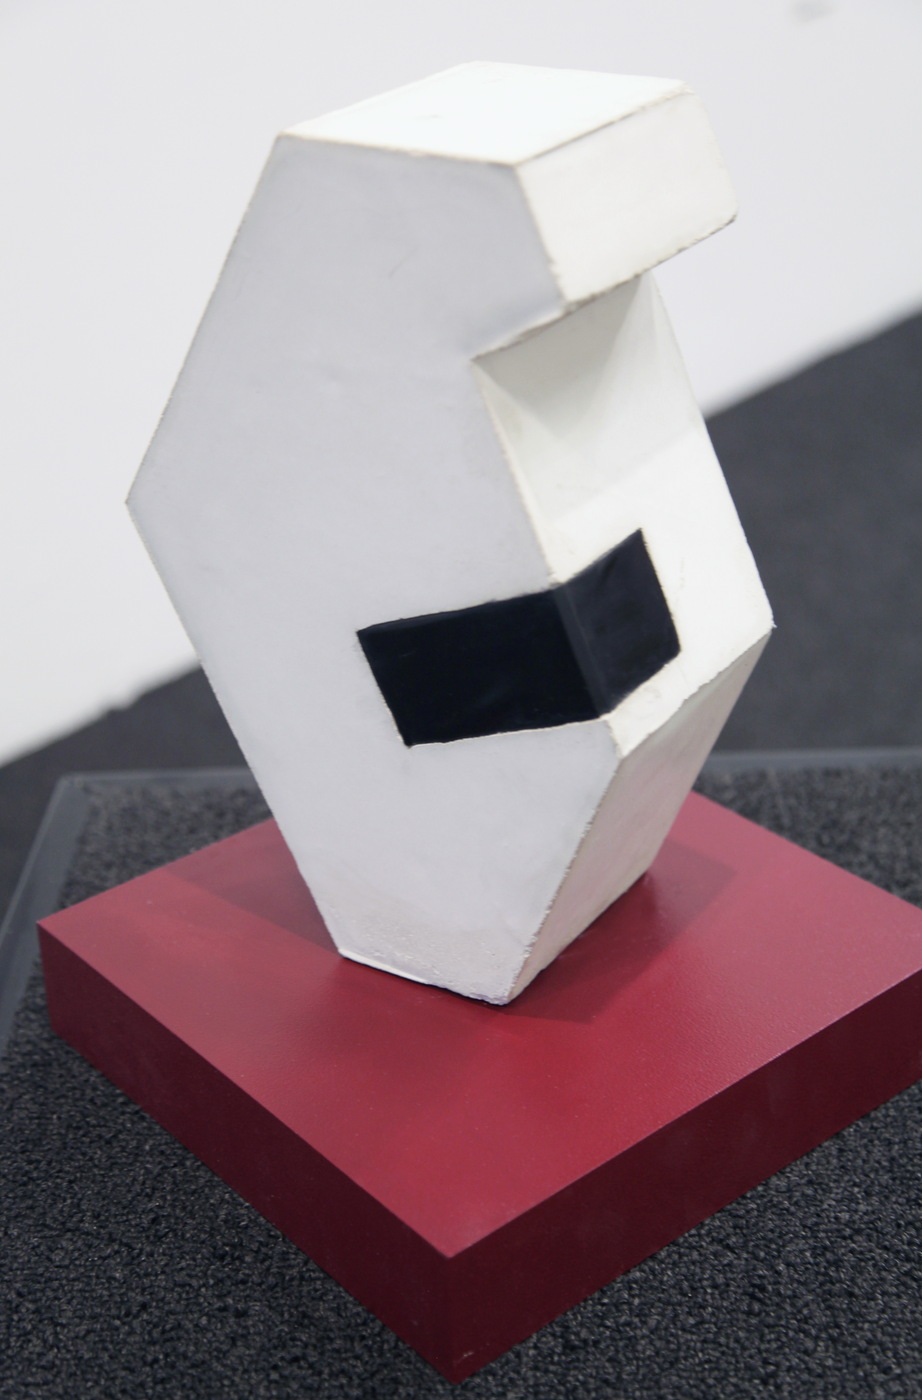 6-#3.Relentless iterations of the same basic product. Cement and latex. 10 x 8 x 4 inches. Itziar Barrio. 2015